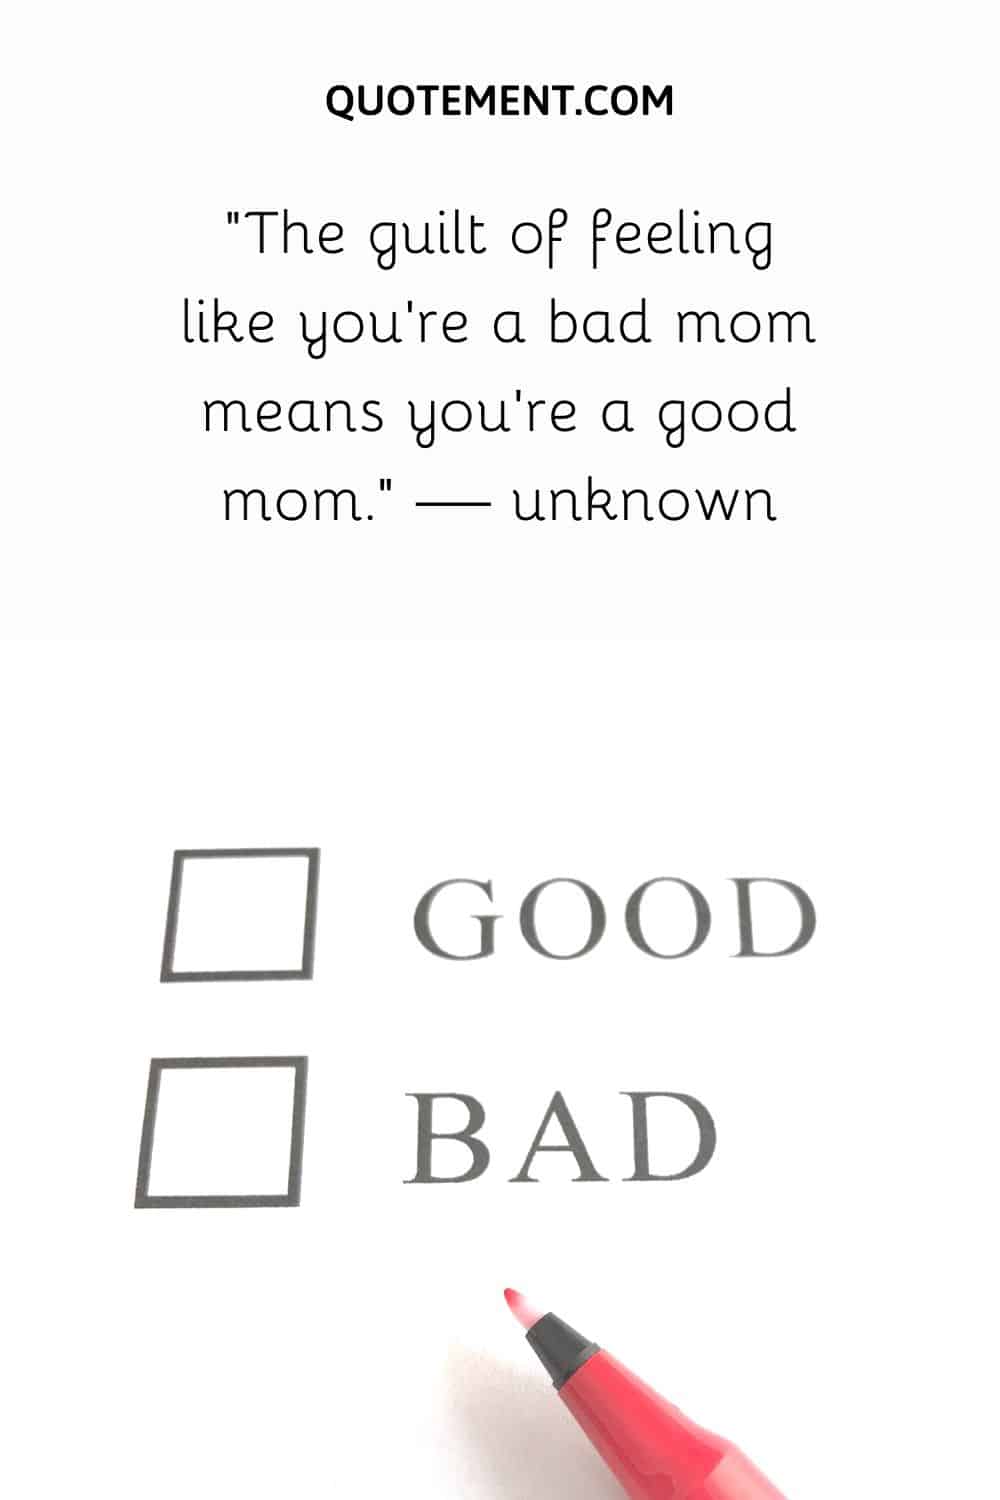 The guilt of feeling like you’re a bad mom means you’re a good mom